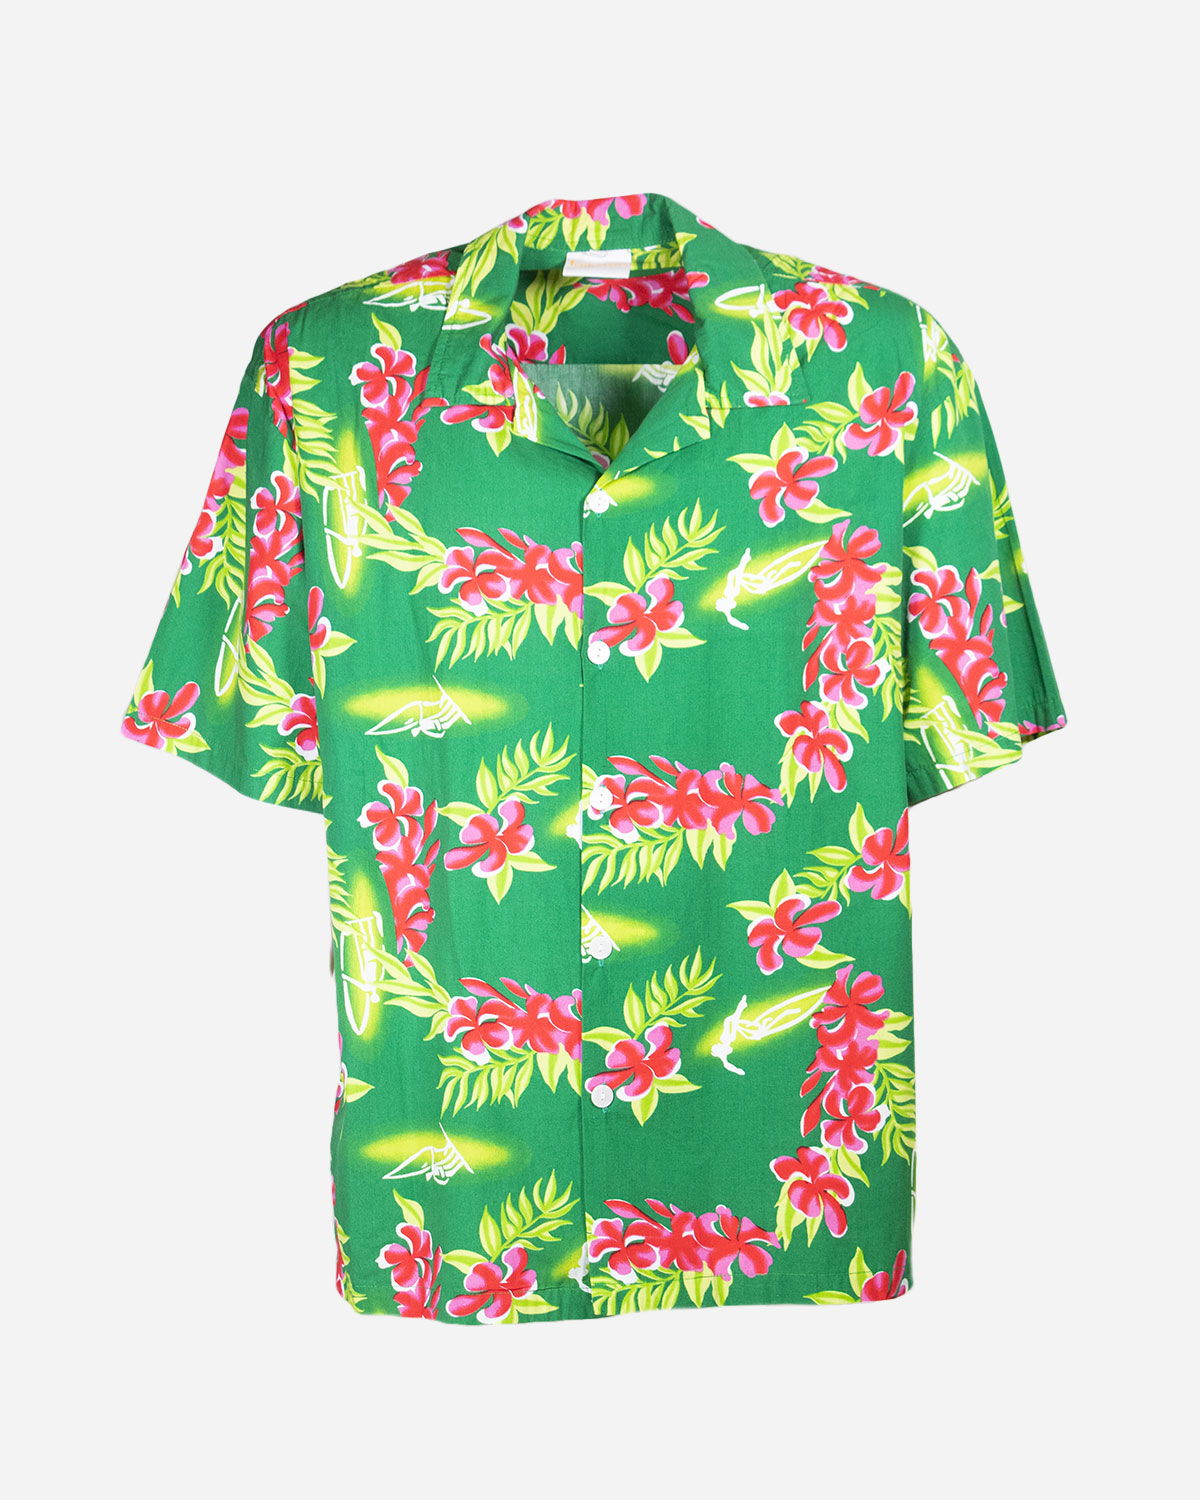 Hawaiian patterned shirts for men: 4 pieces